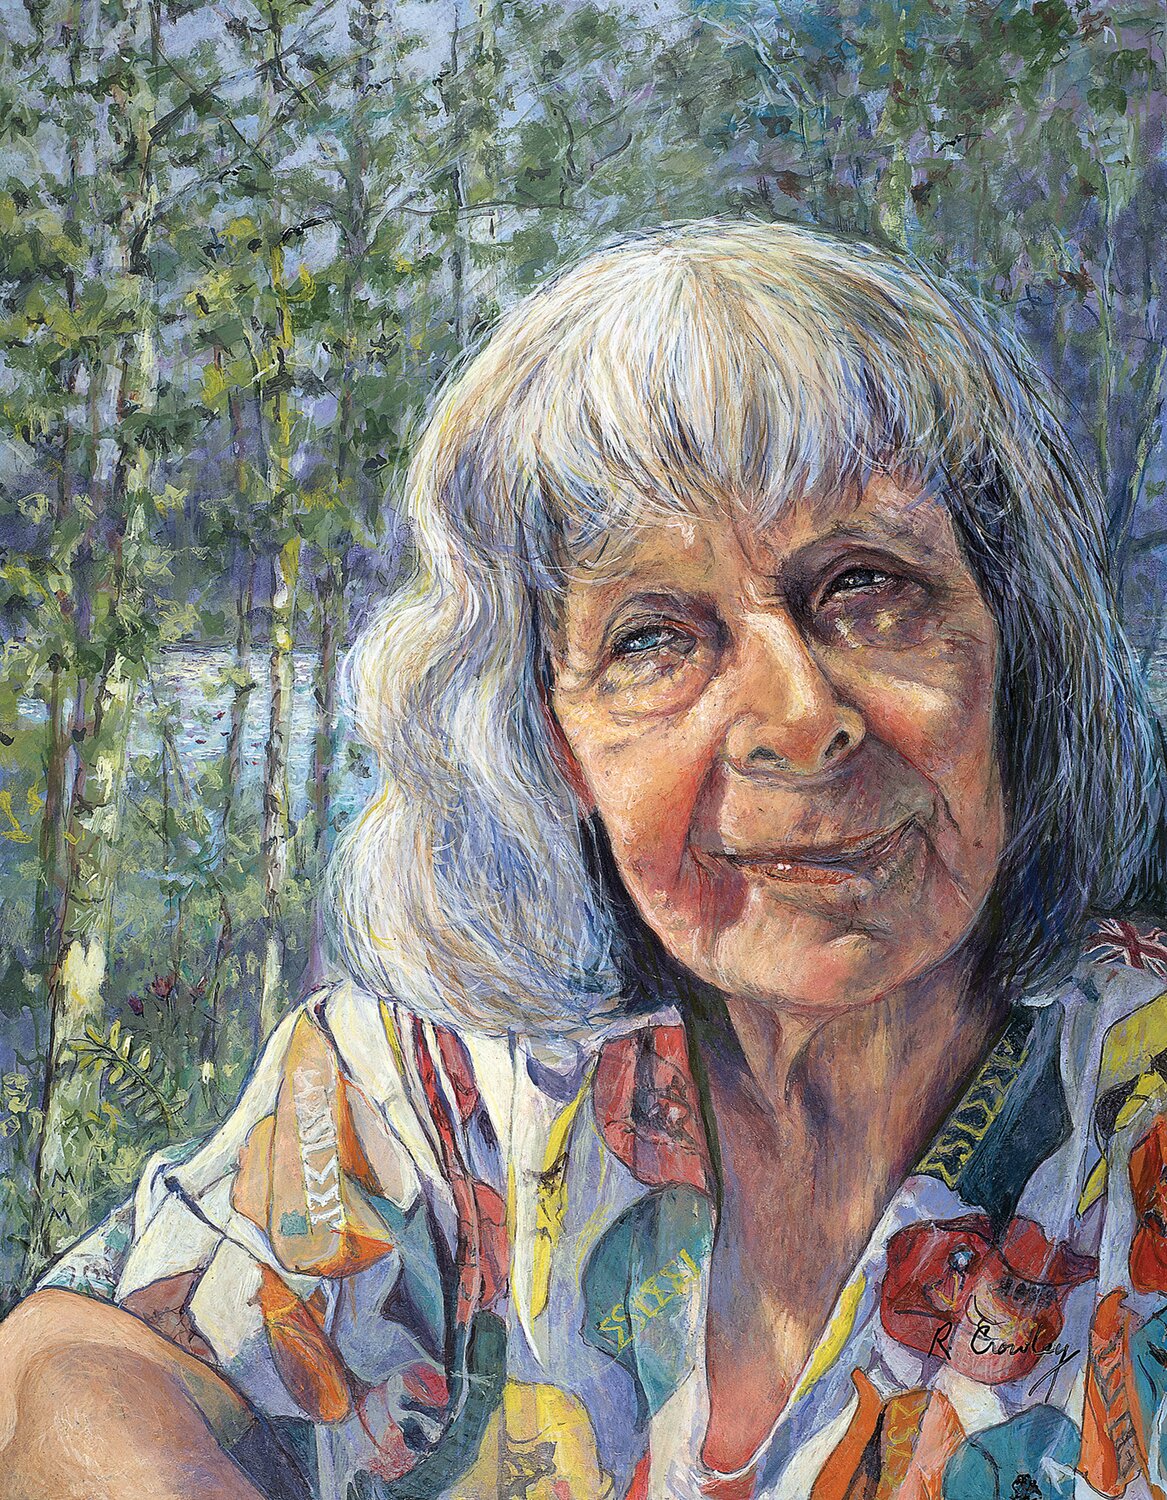 “Miriam,” an egg tempera painting by Robin Crowley, was recently shown at the Phillips’ Mill Members Art Show. In May, 2025, Souderton’s Generations of Indian Valley will host a solo show of Crowley’s work.